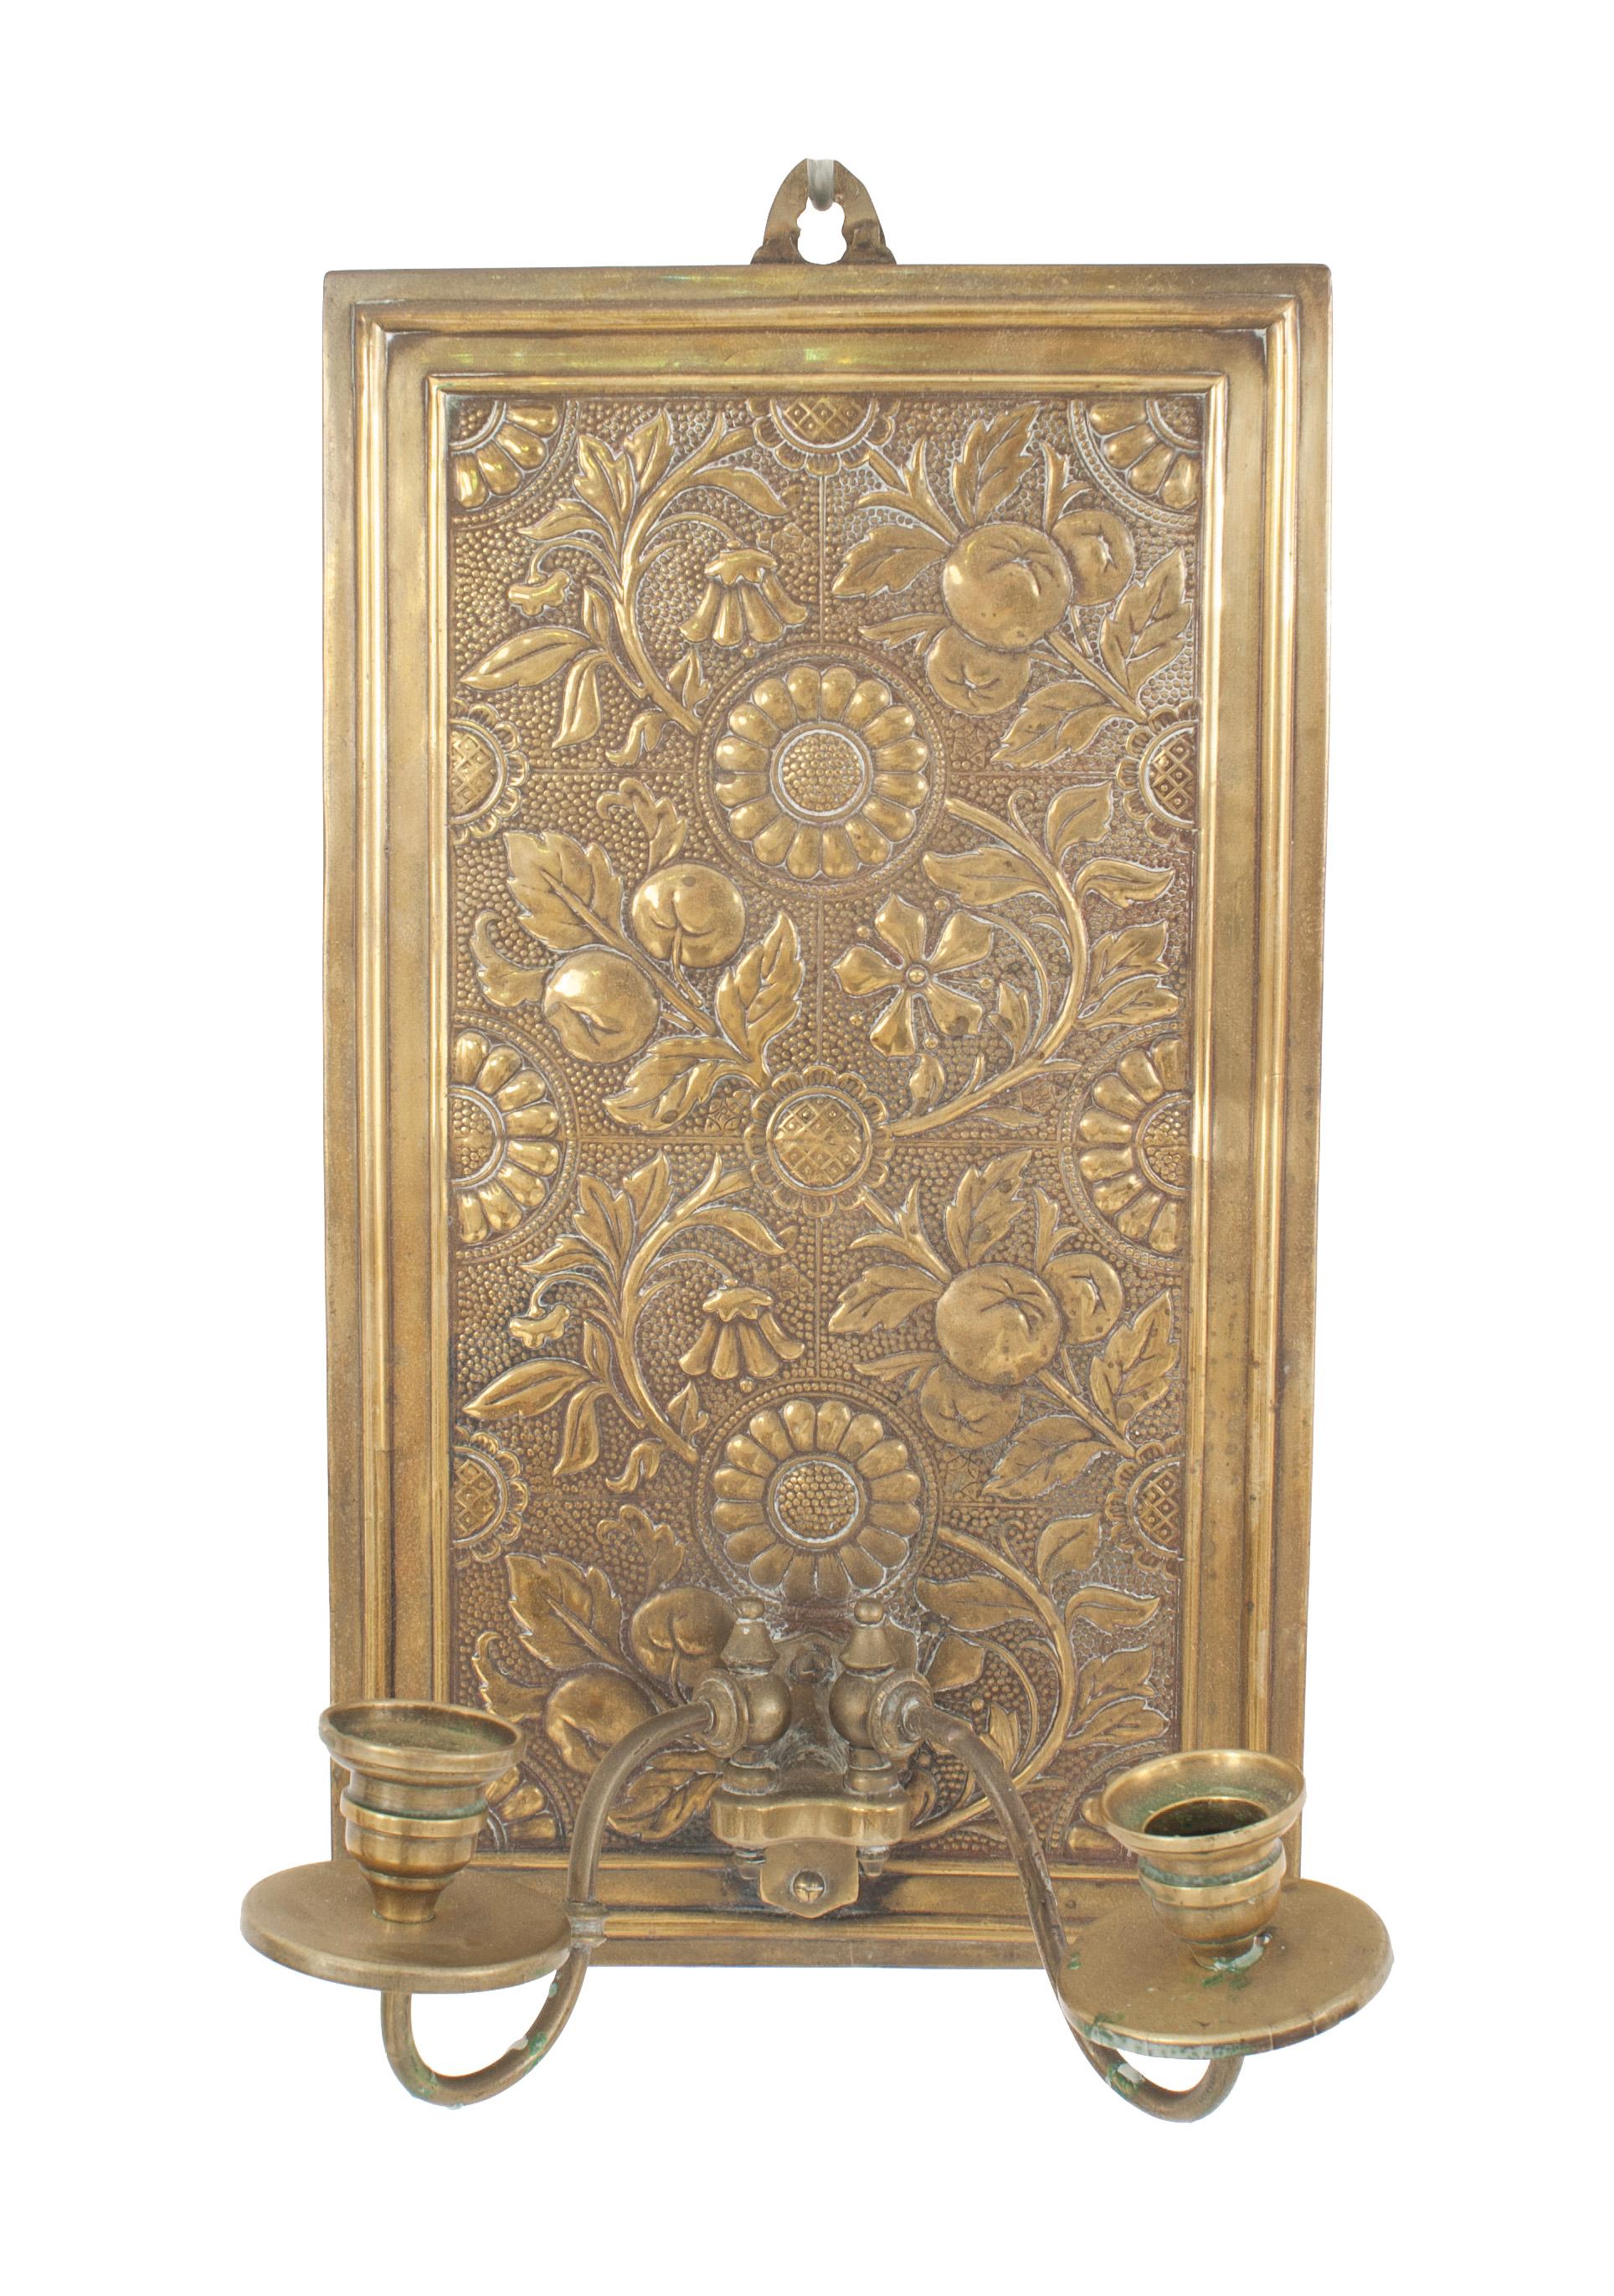 Pair of English Arts & Crafts (Aesthetic Movement) rectangular shaped brass embossed sconces with floral design and two swivel scroll form arms.
 